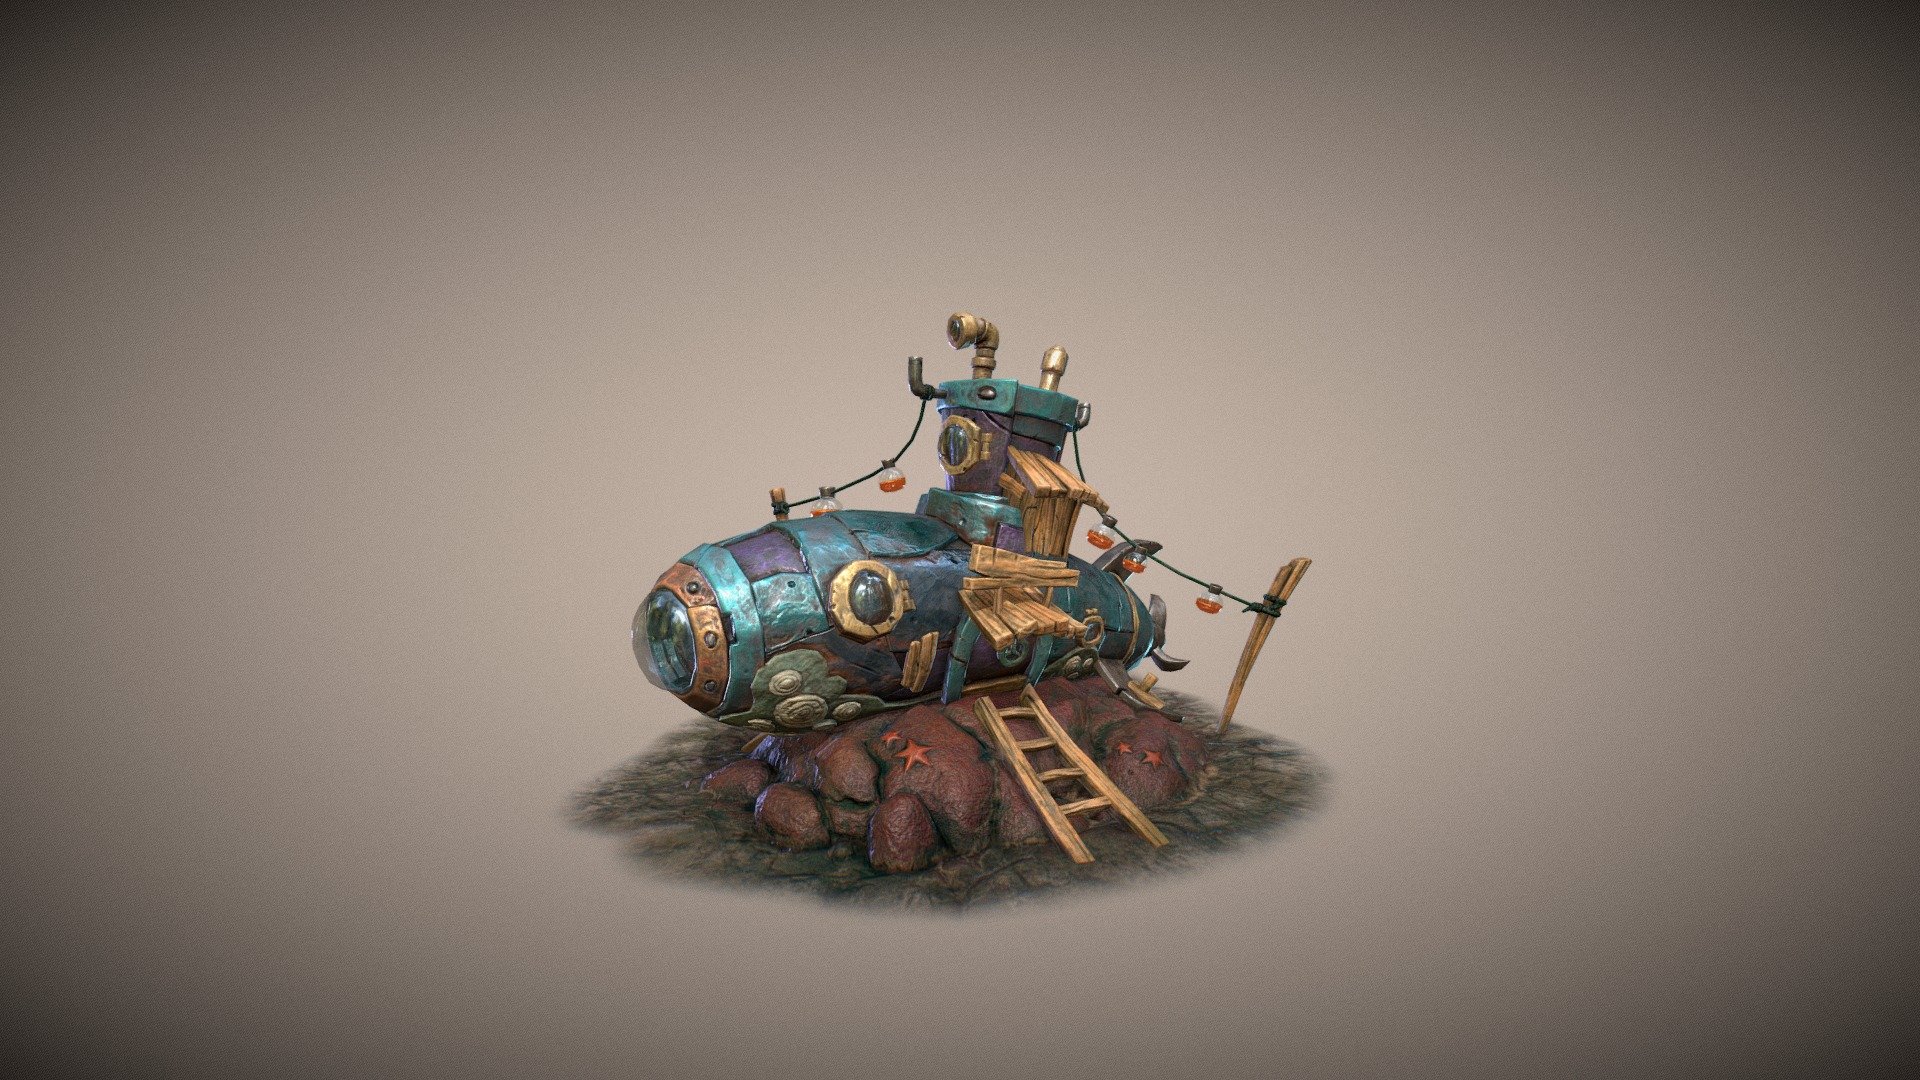 New attempt！ Design comes from Charlène Le Scanff - Submarine house - 3D model by weiiew 3d model